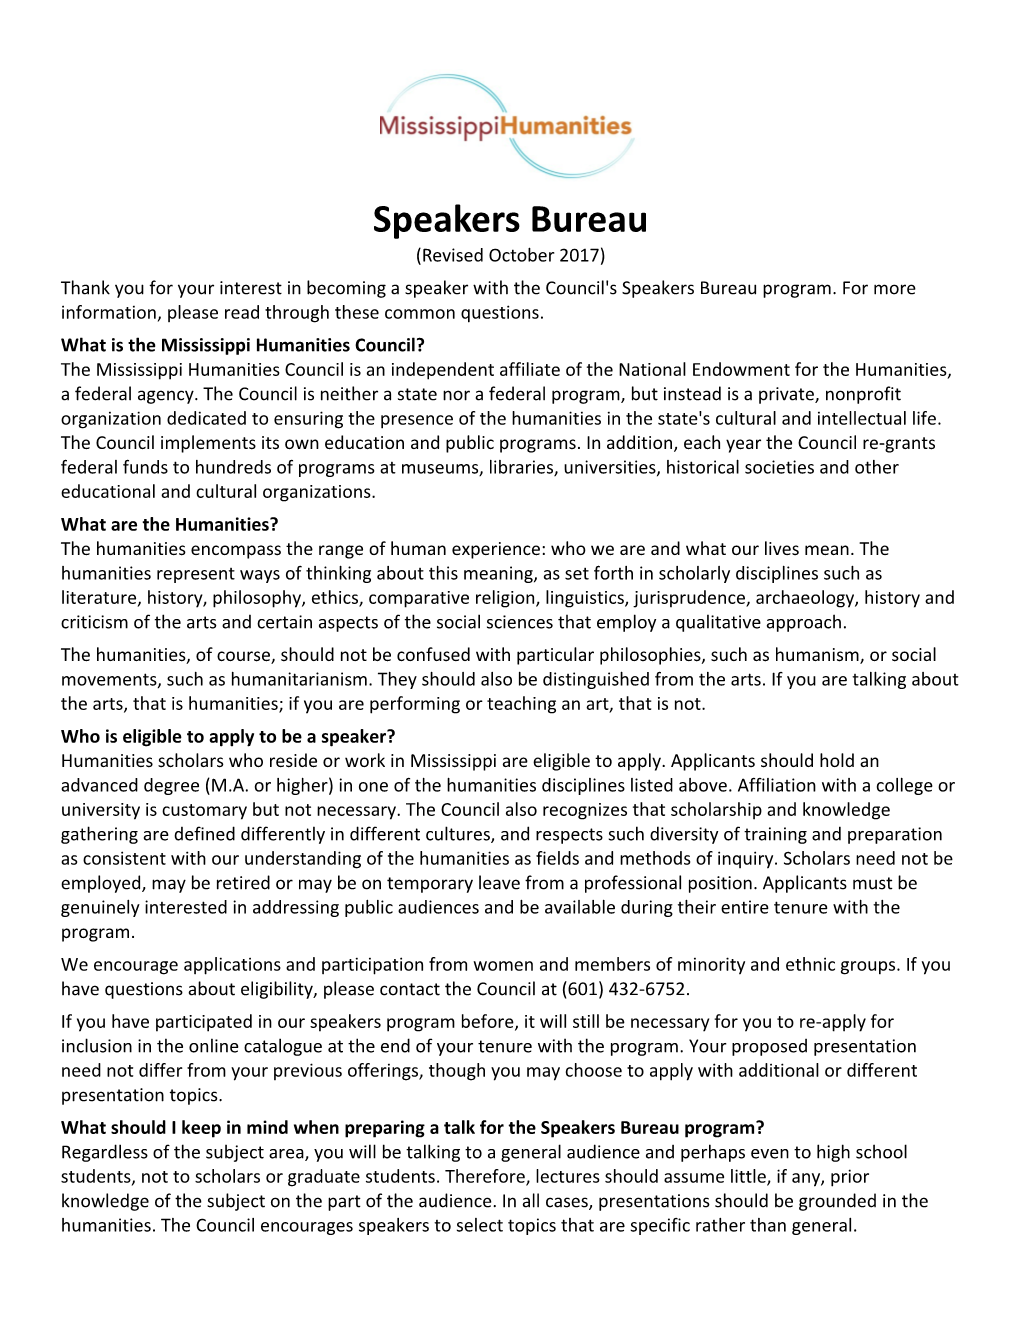 Who Is Eligible to Apply to Be a Speaker?